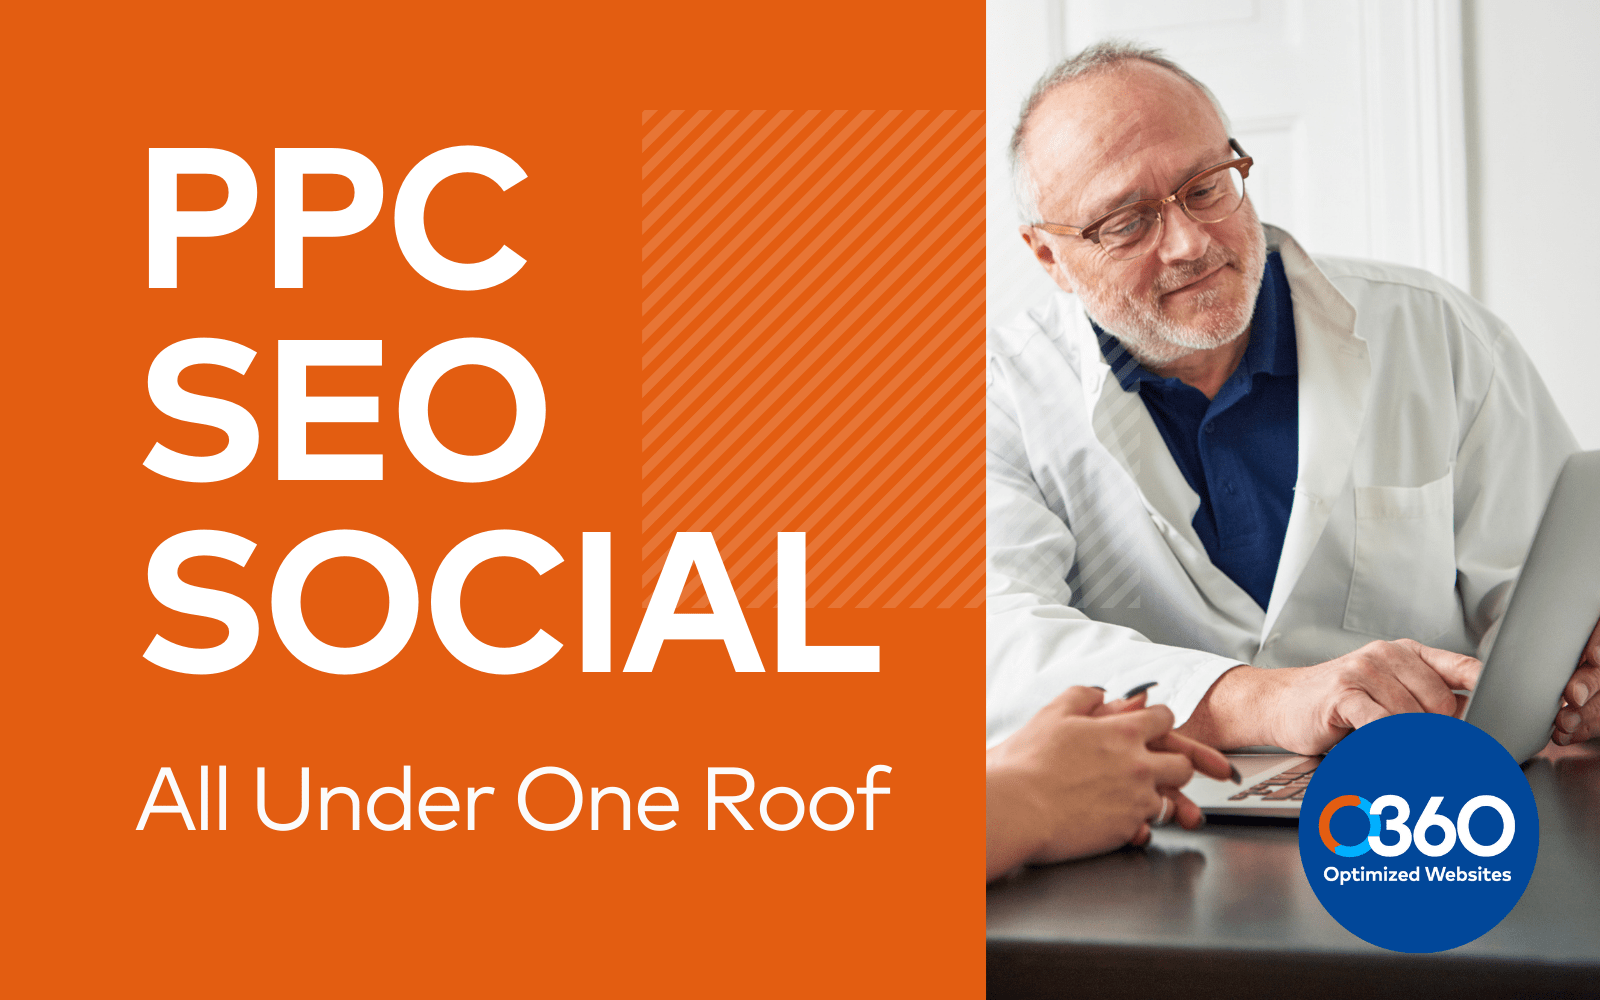 ppc seo social with an image of a male doctor